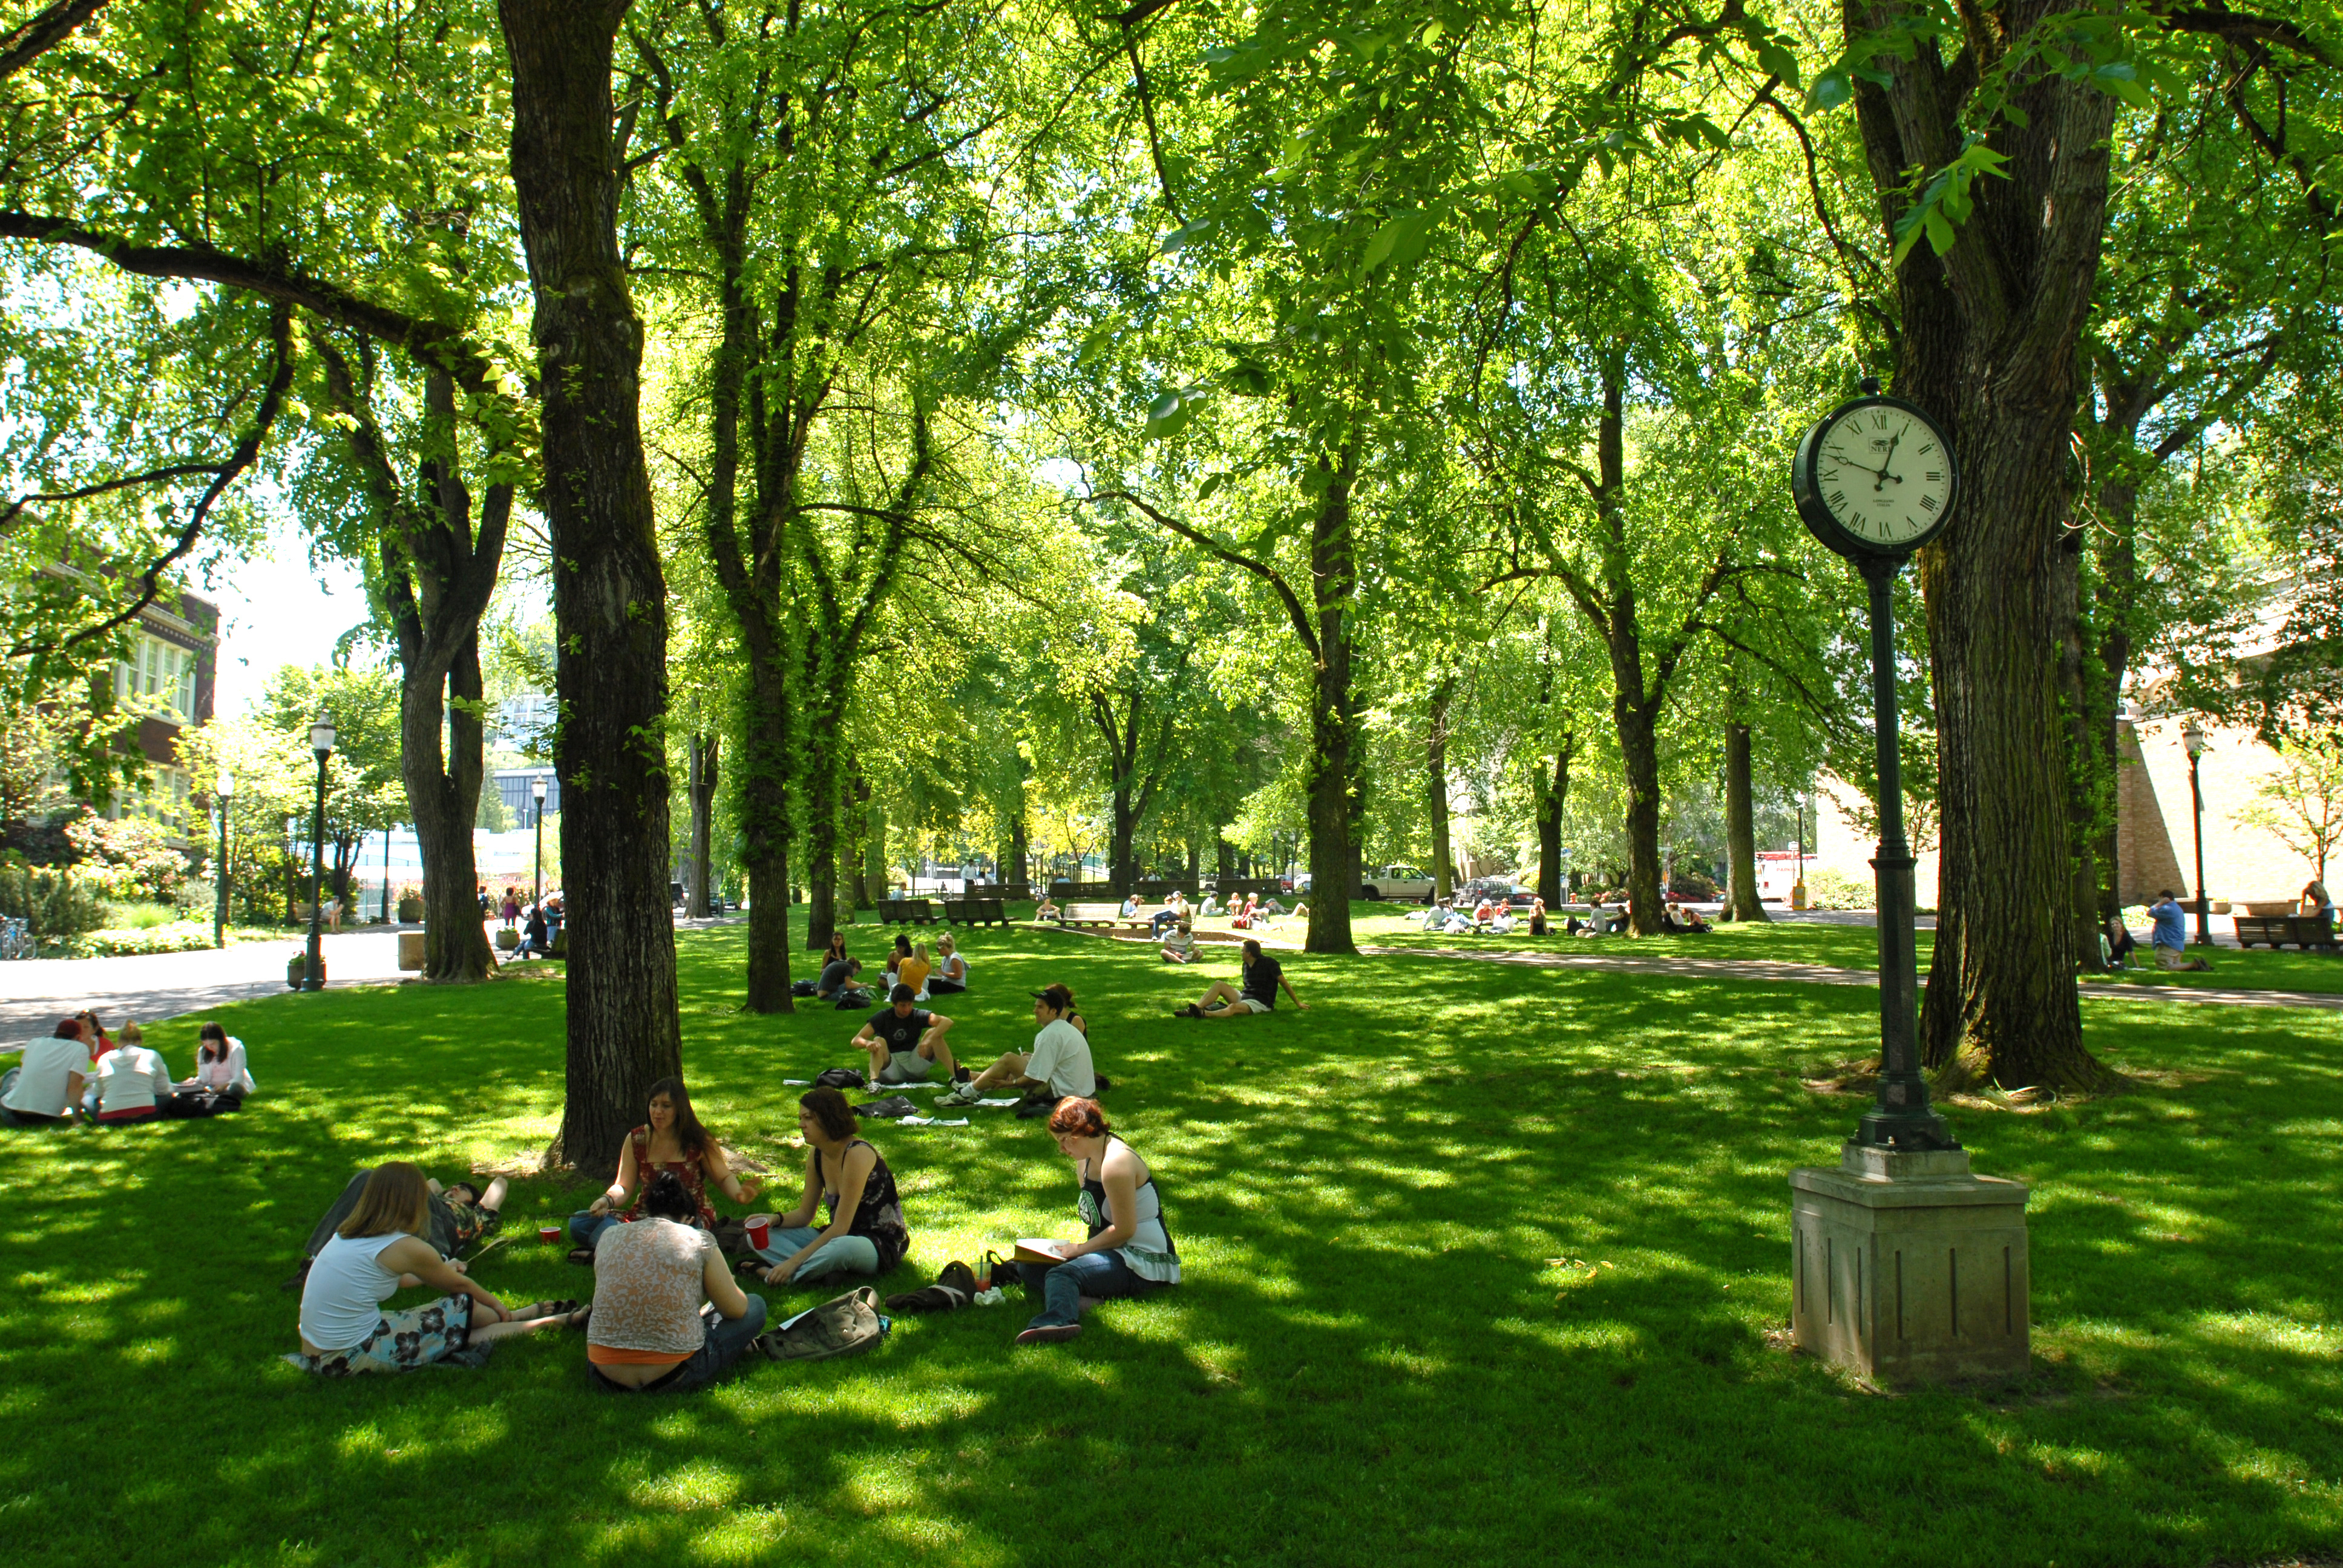 Students studying in the park blocks